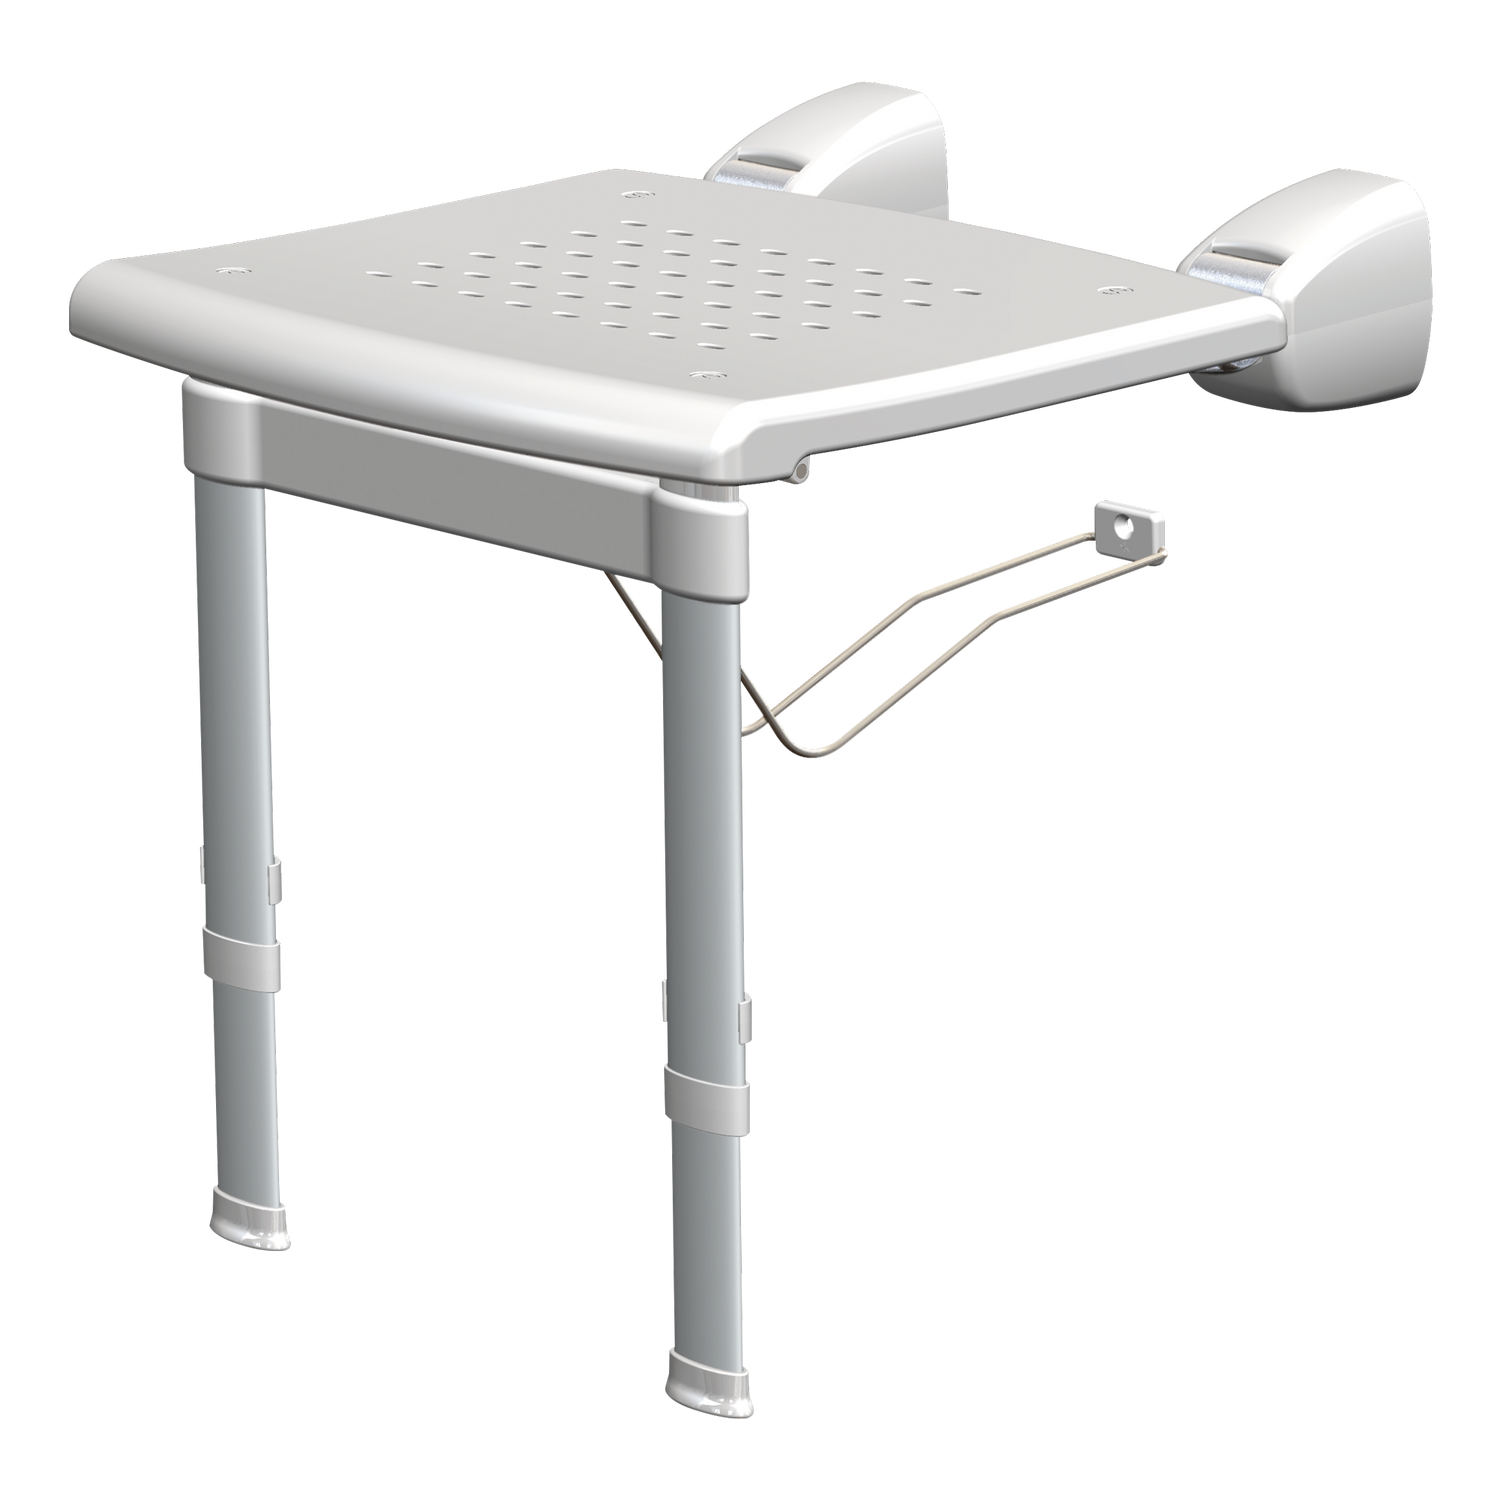 SecuCare Foldable shower chair with extendible legs